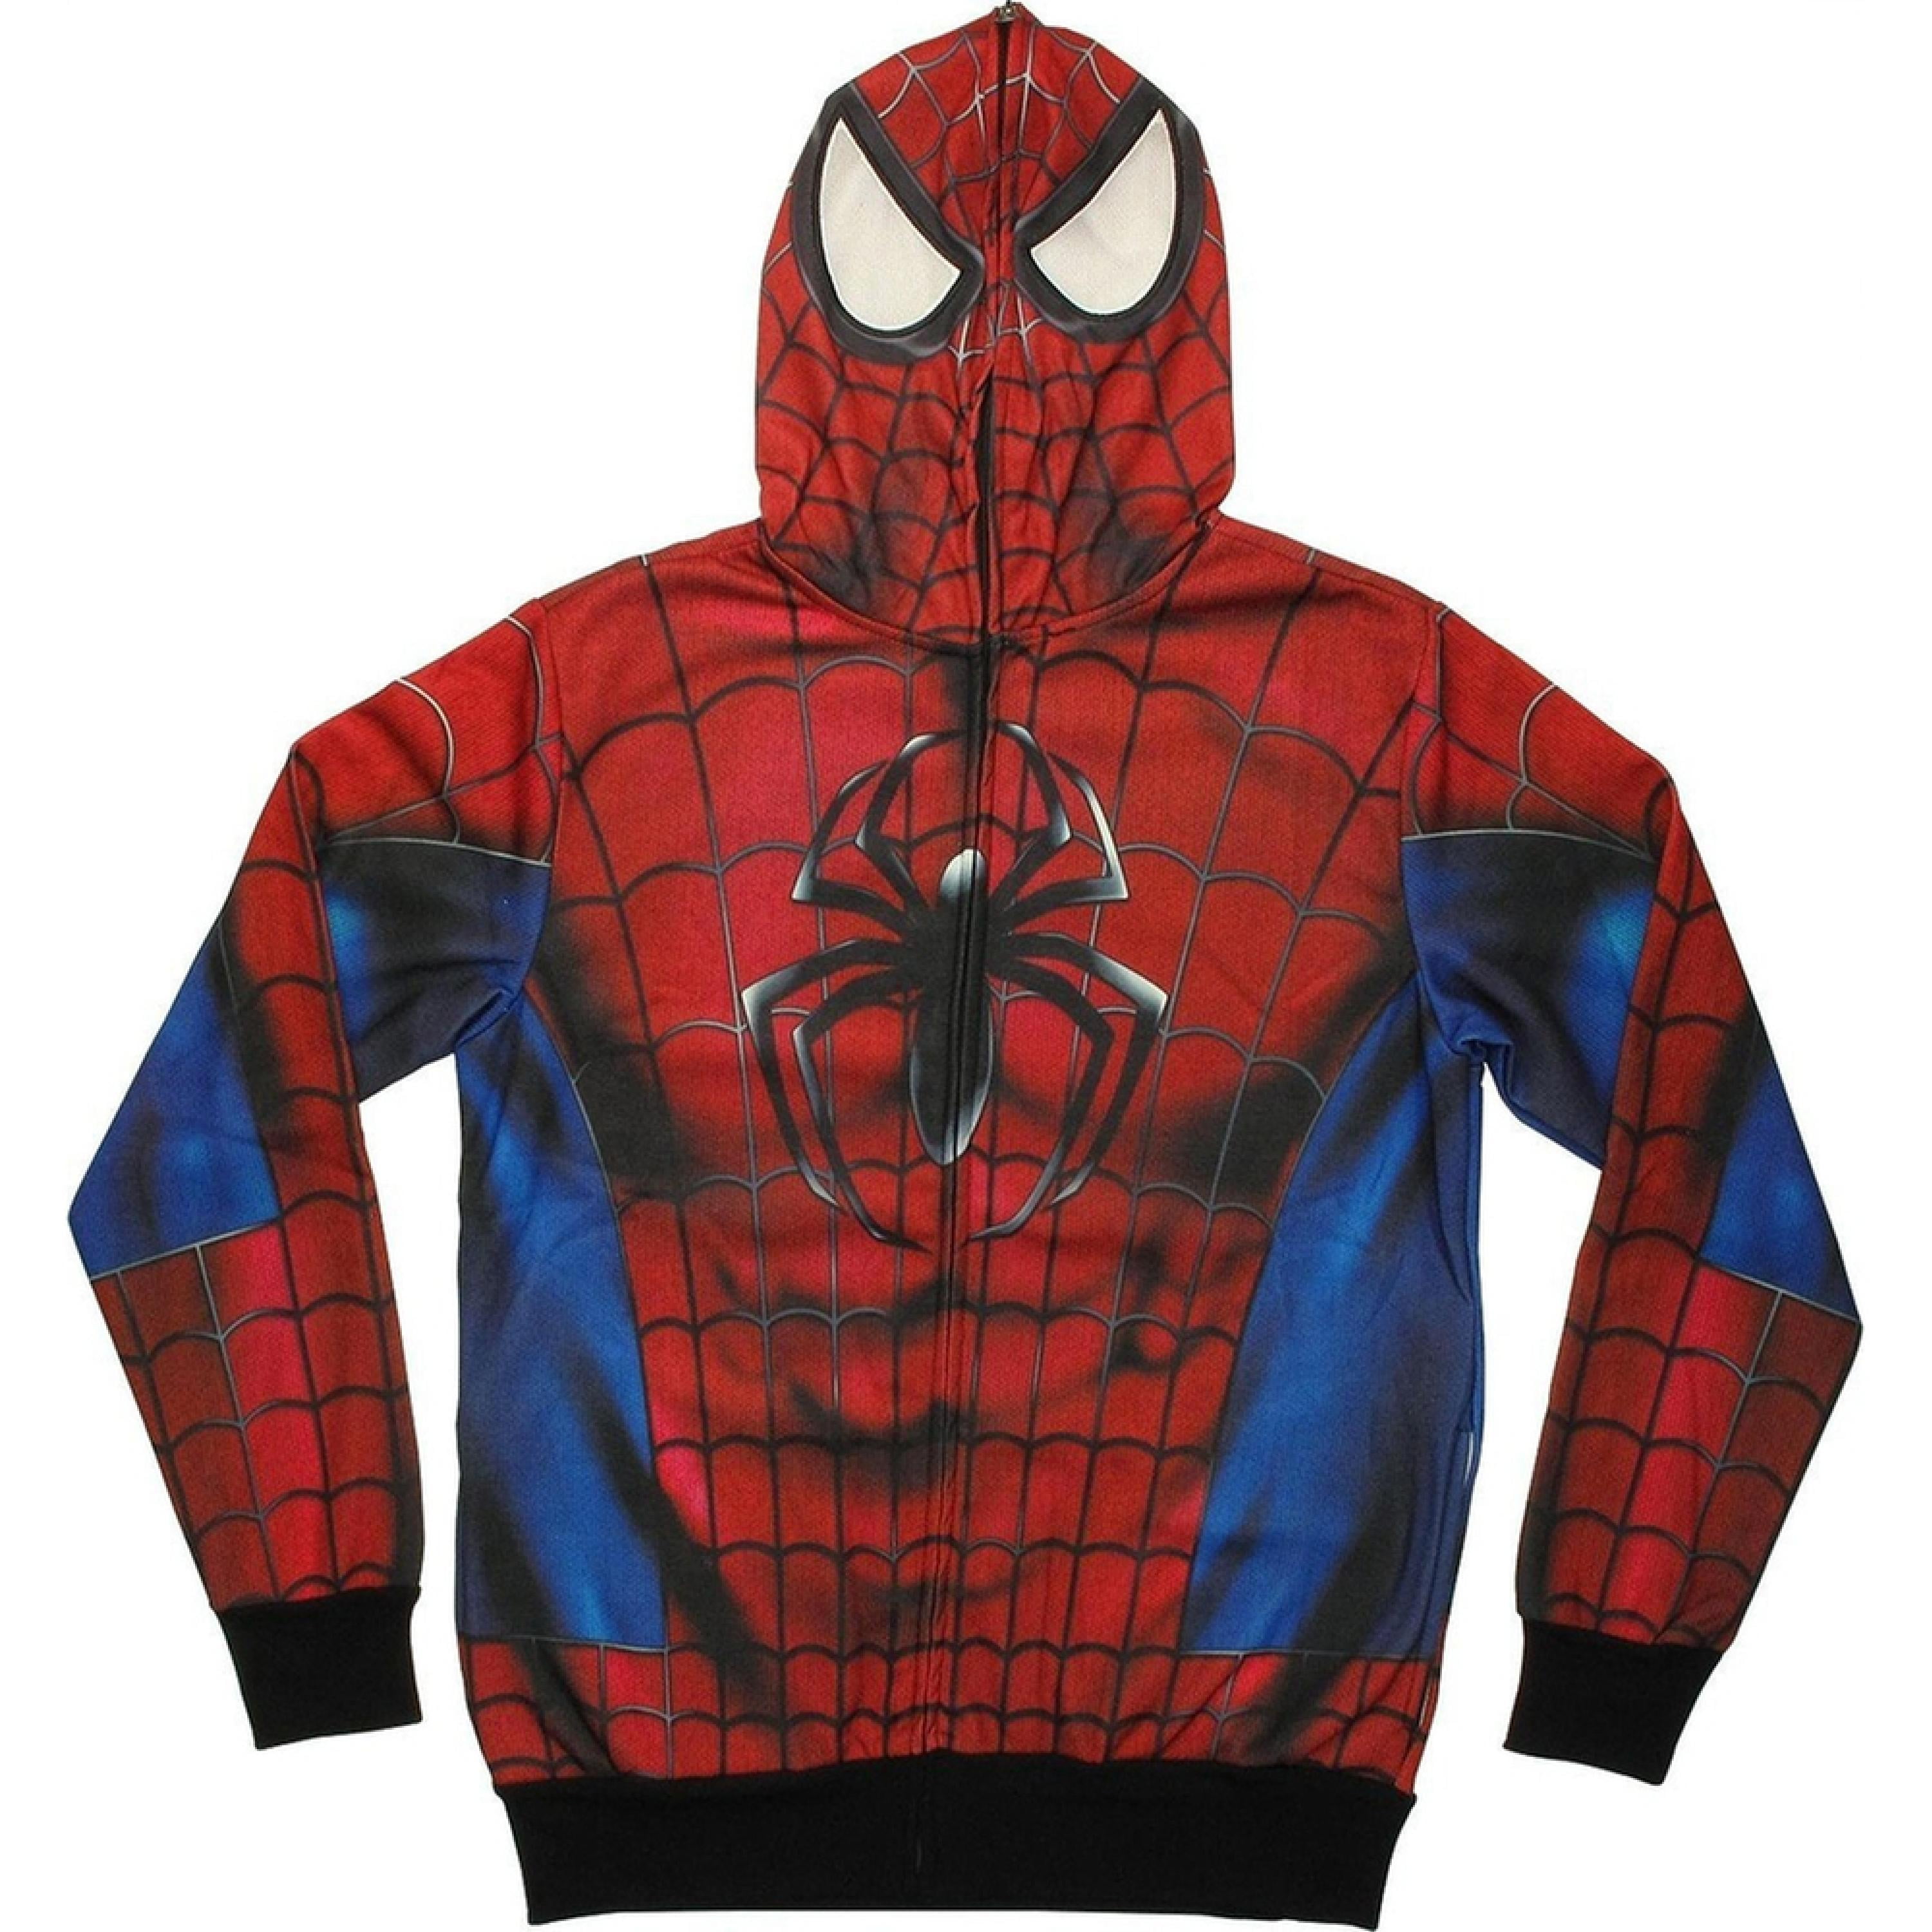 Marvel Spider-Man Hoodie Men's Costume Sublimated Full Zipper With Mask  X-Large